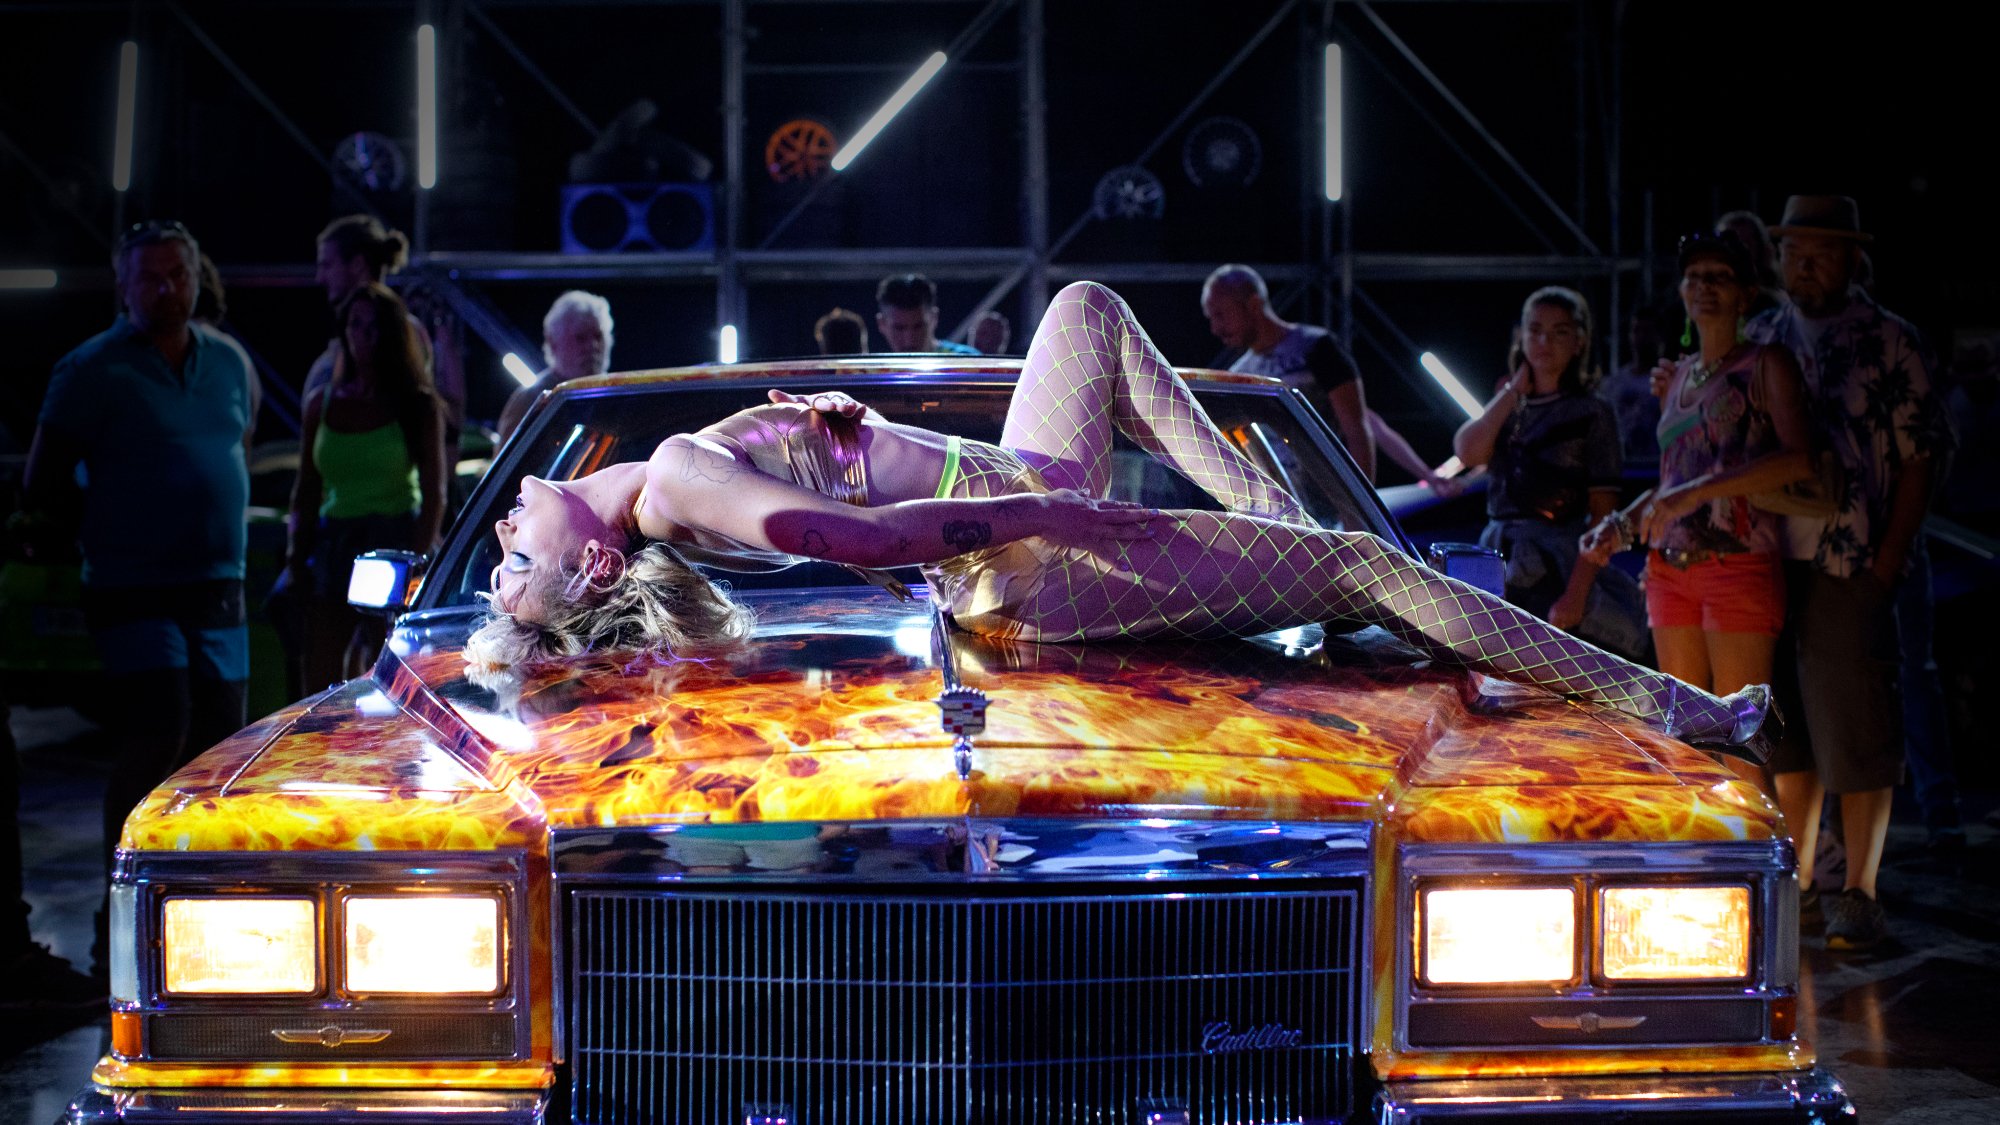 'Titane' Agathe Rousselle as Alexia laying on her back on the hood of a car with painted flames on it